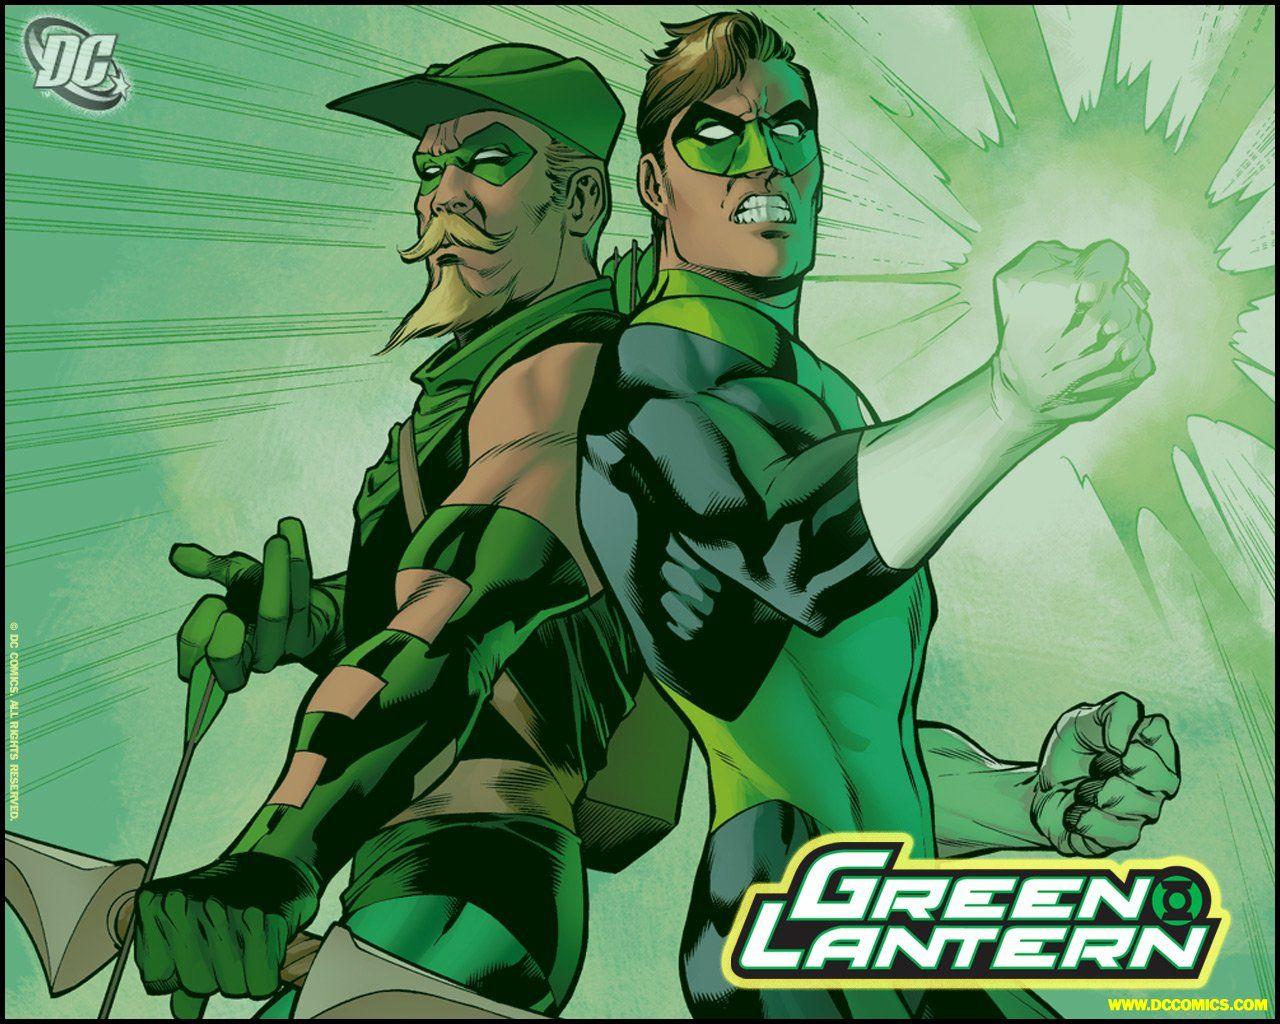 Green Lantern Wallpaper and Background Imagex1024